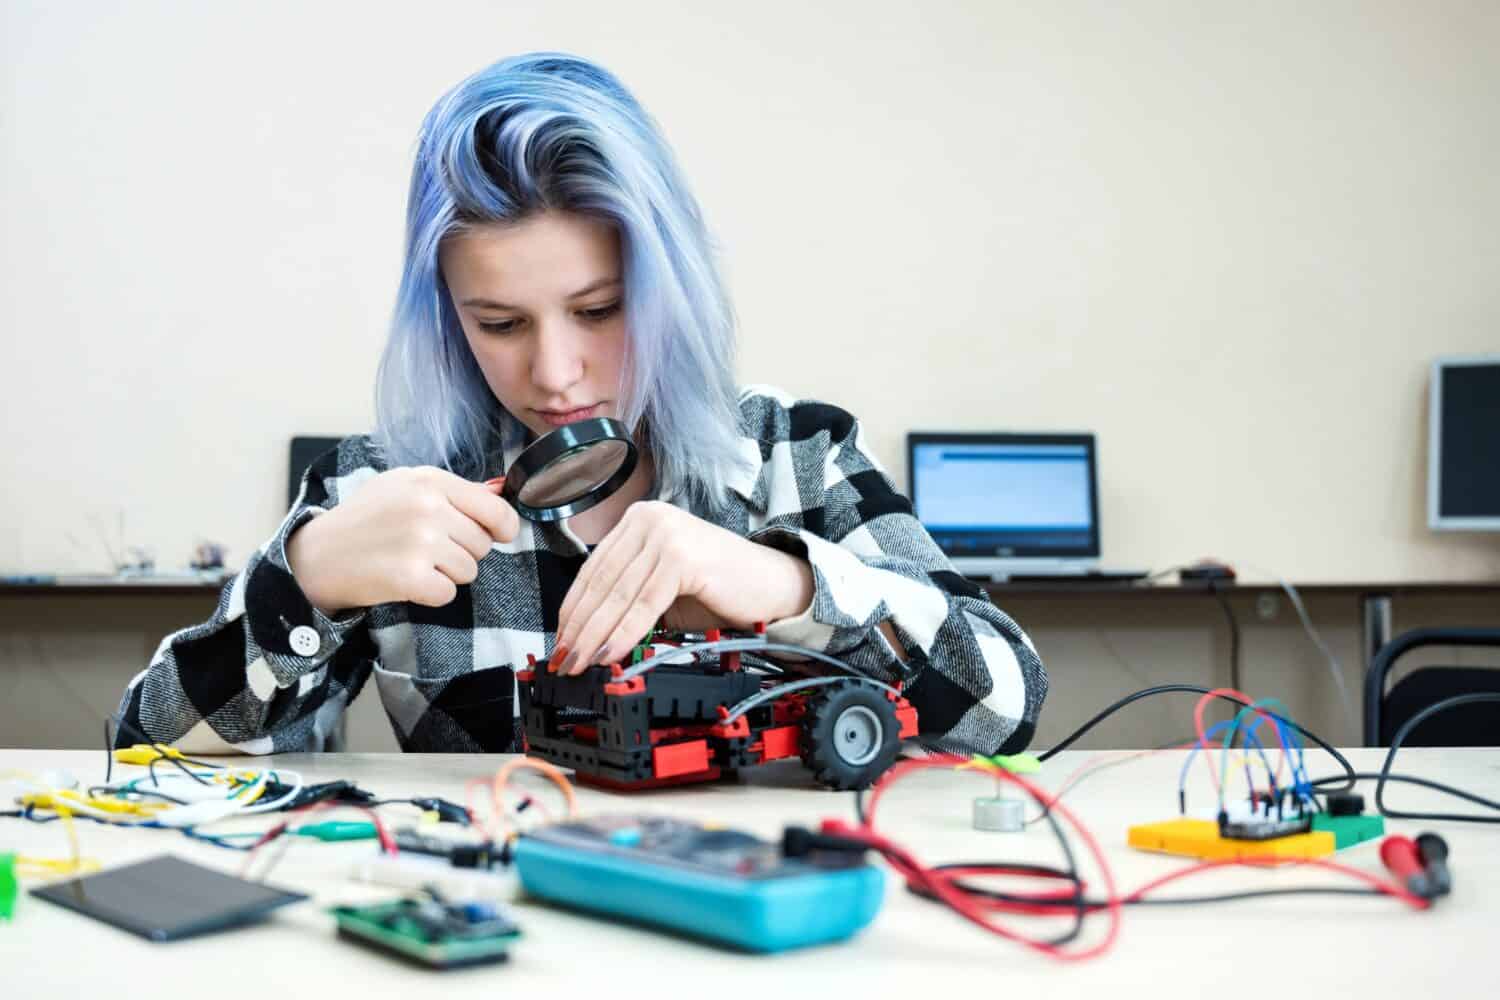 School students making robotic cars. Teenager girl at robotics school makes robot managed from the constructor, child learns robot constructing.